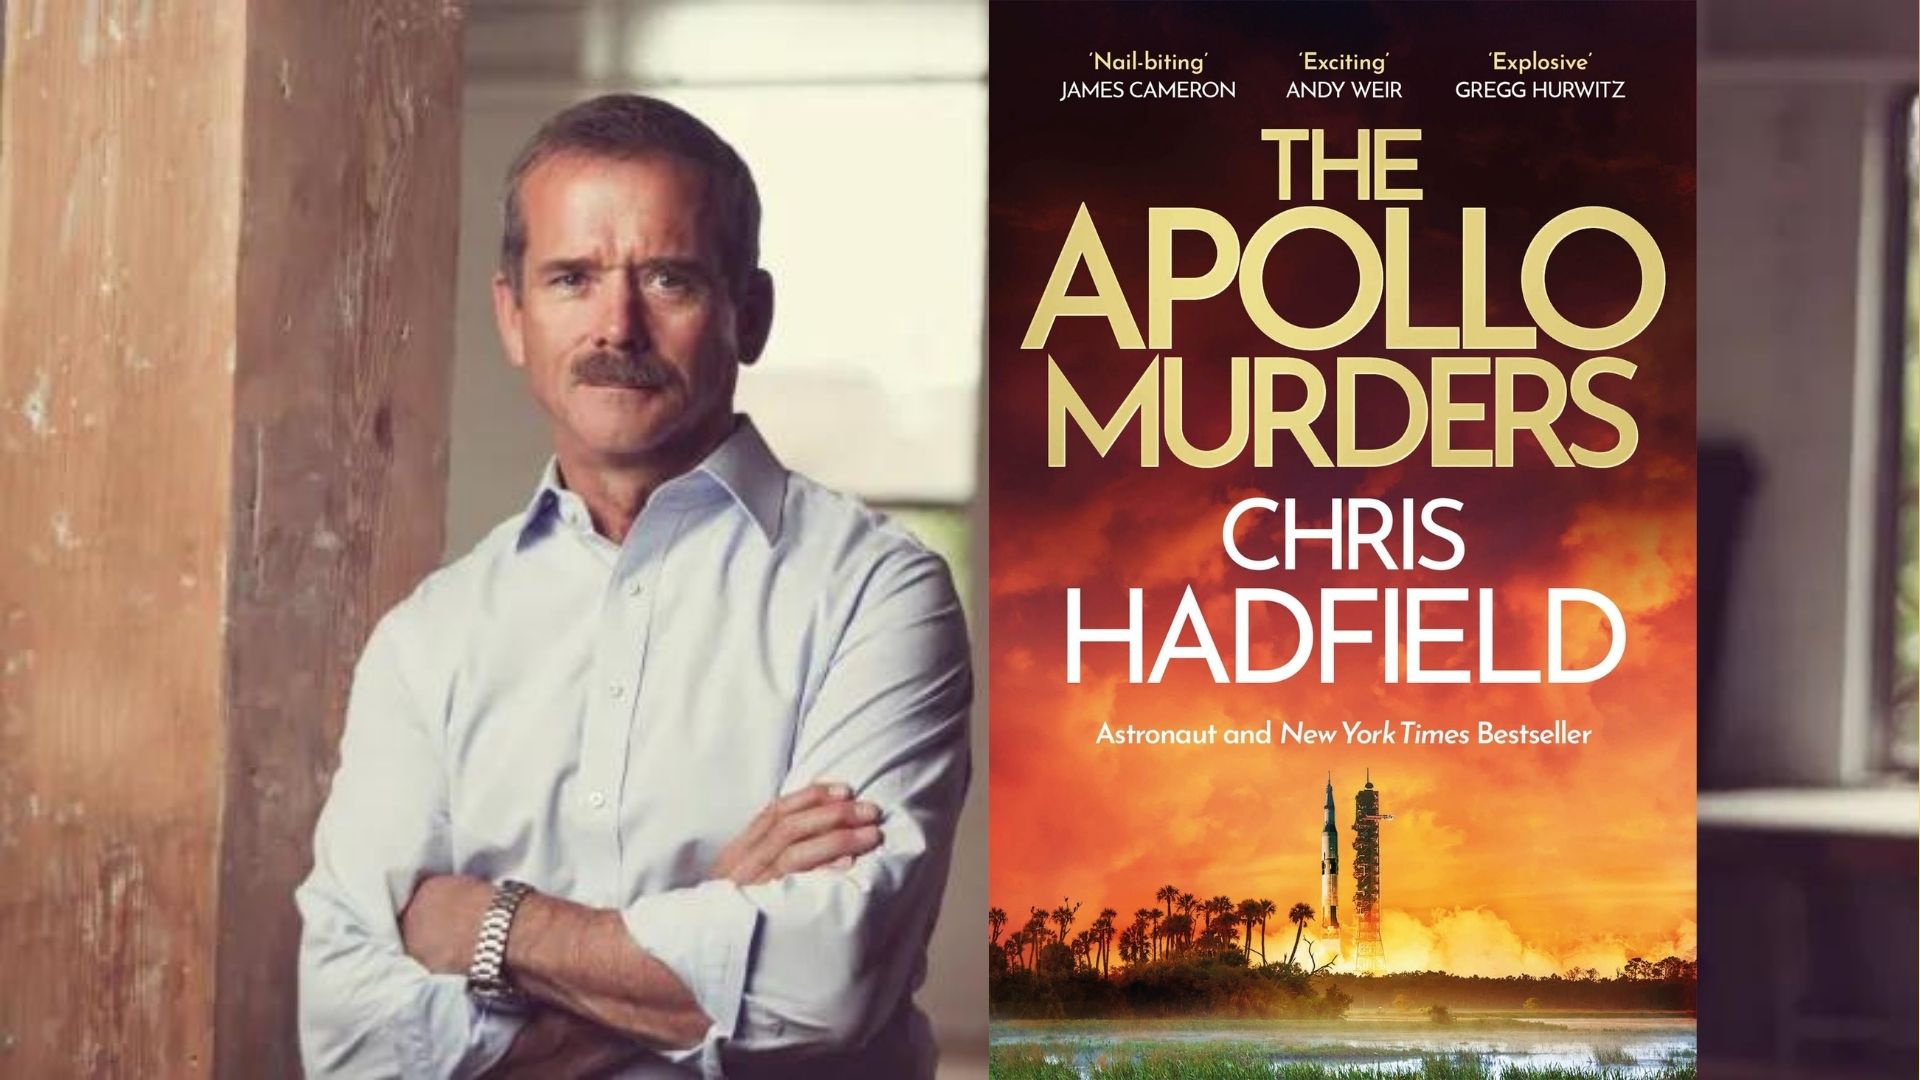 Chris Hadfield and Sylvester Stallone To Bring ‘The Apollo Murders’ Novel To The Screen